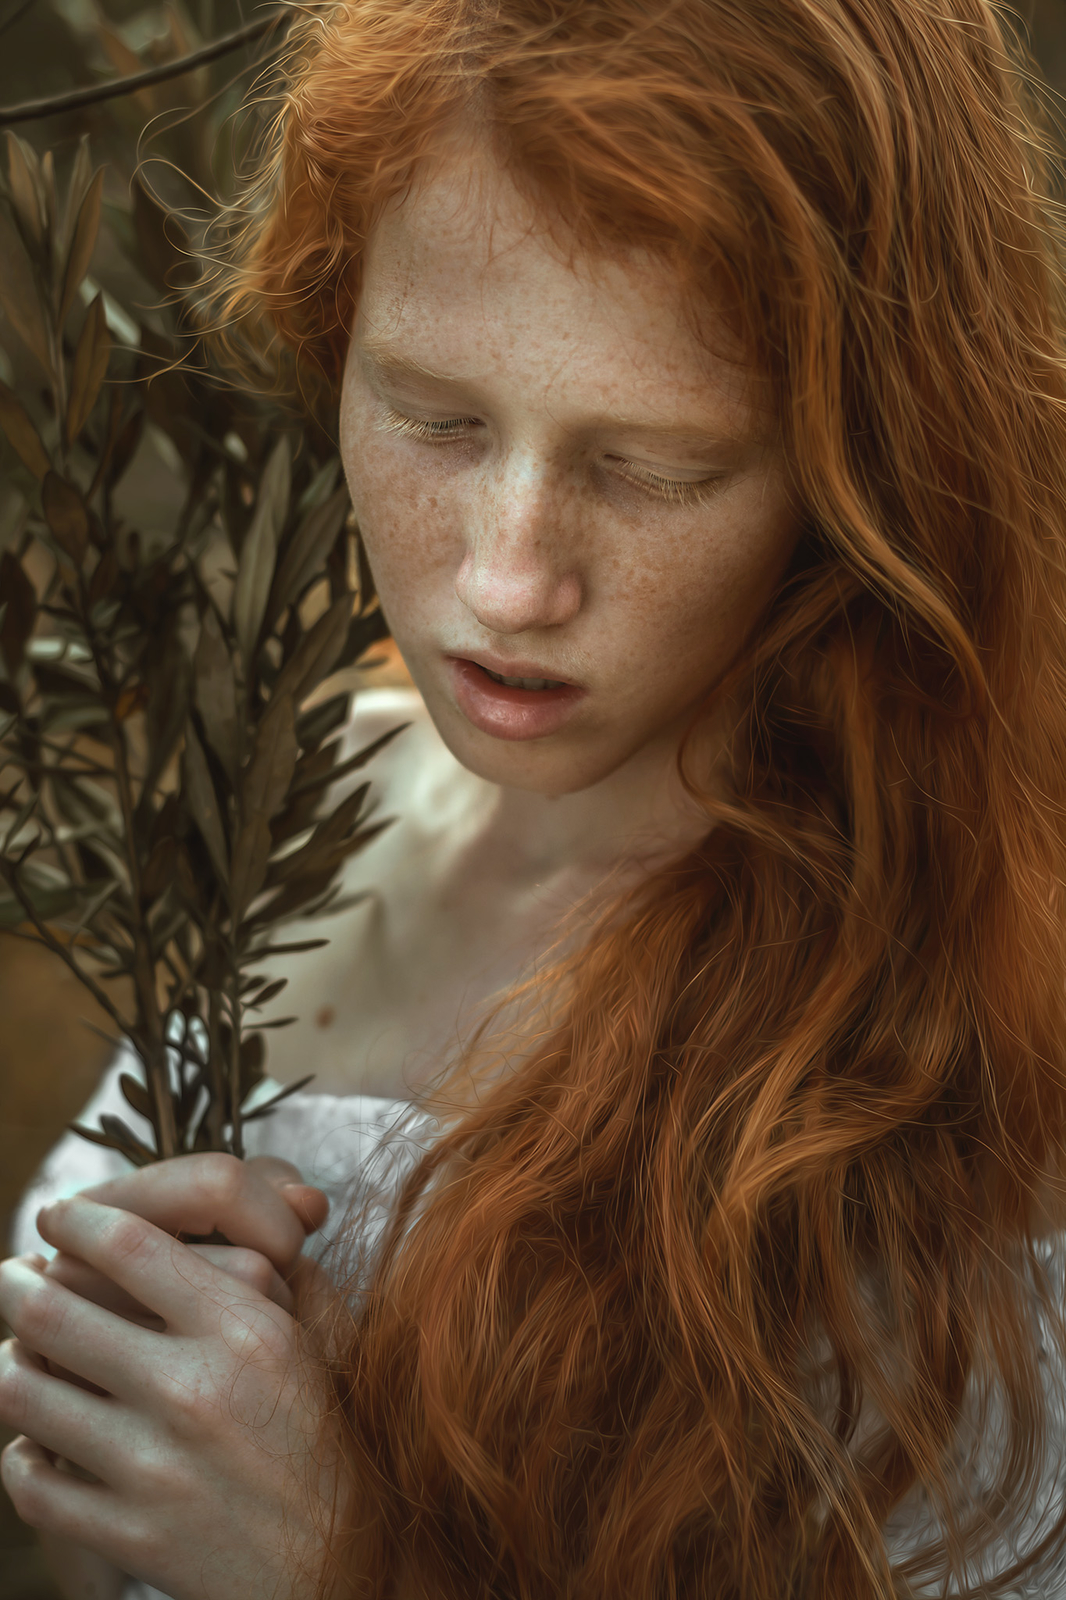 A Moment With Freckles Photo Contest Winner